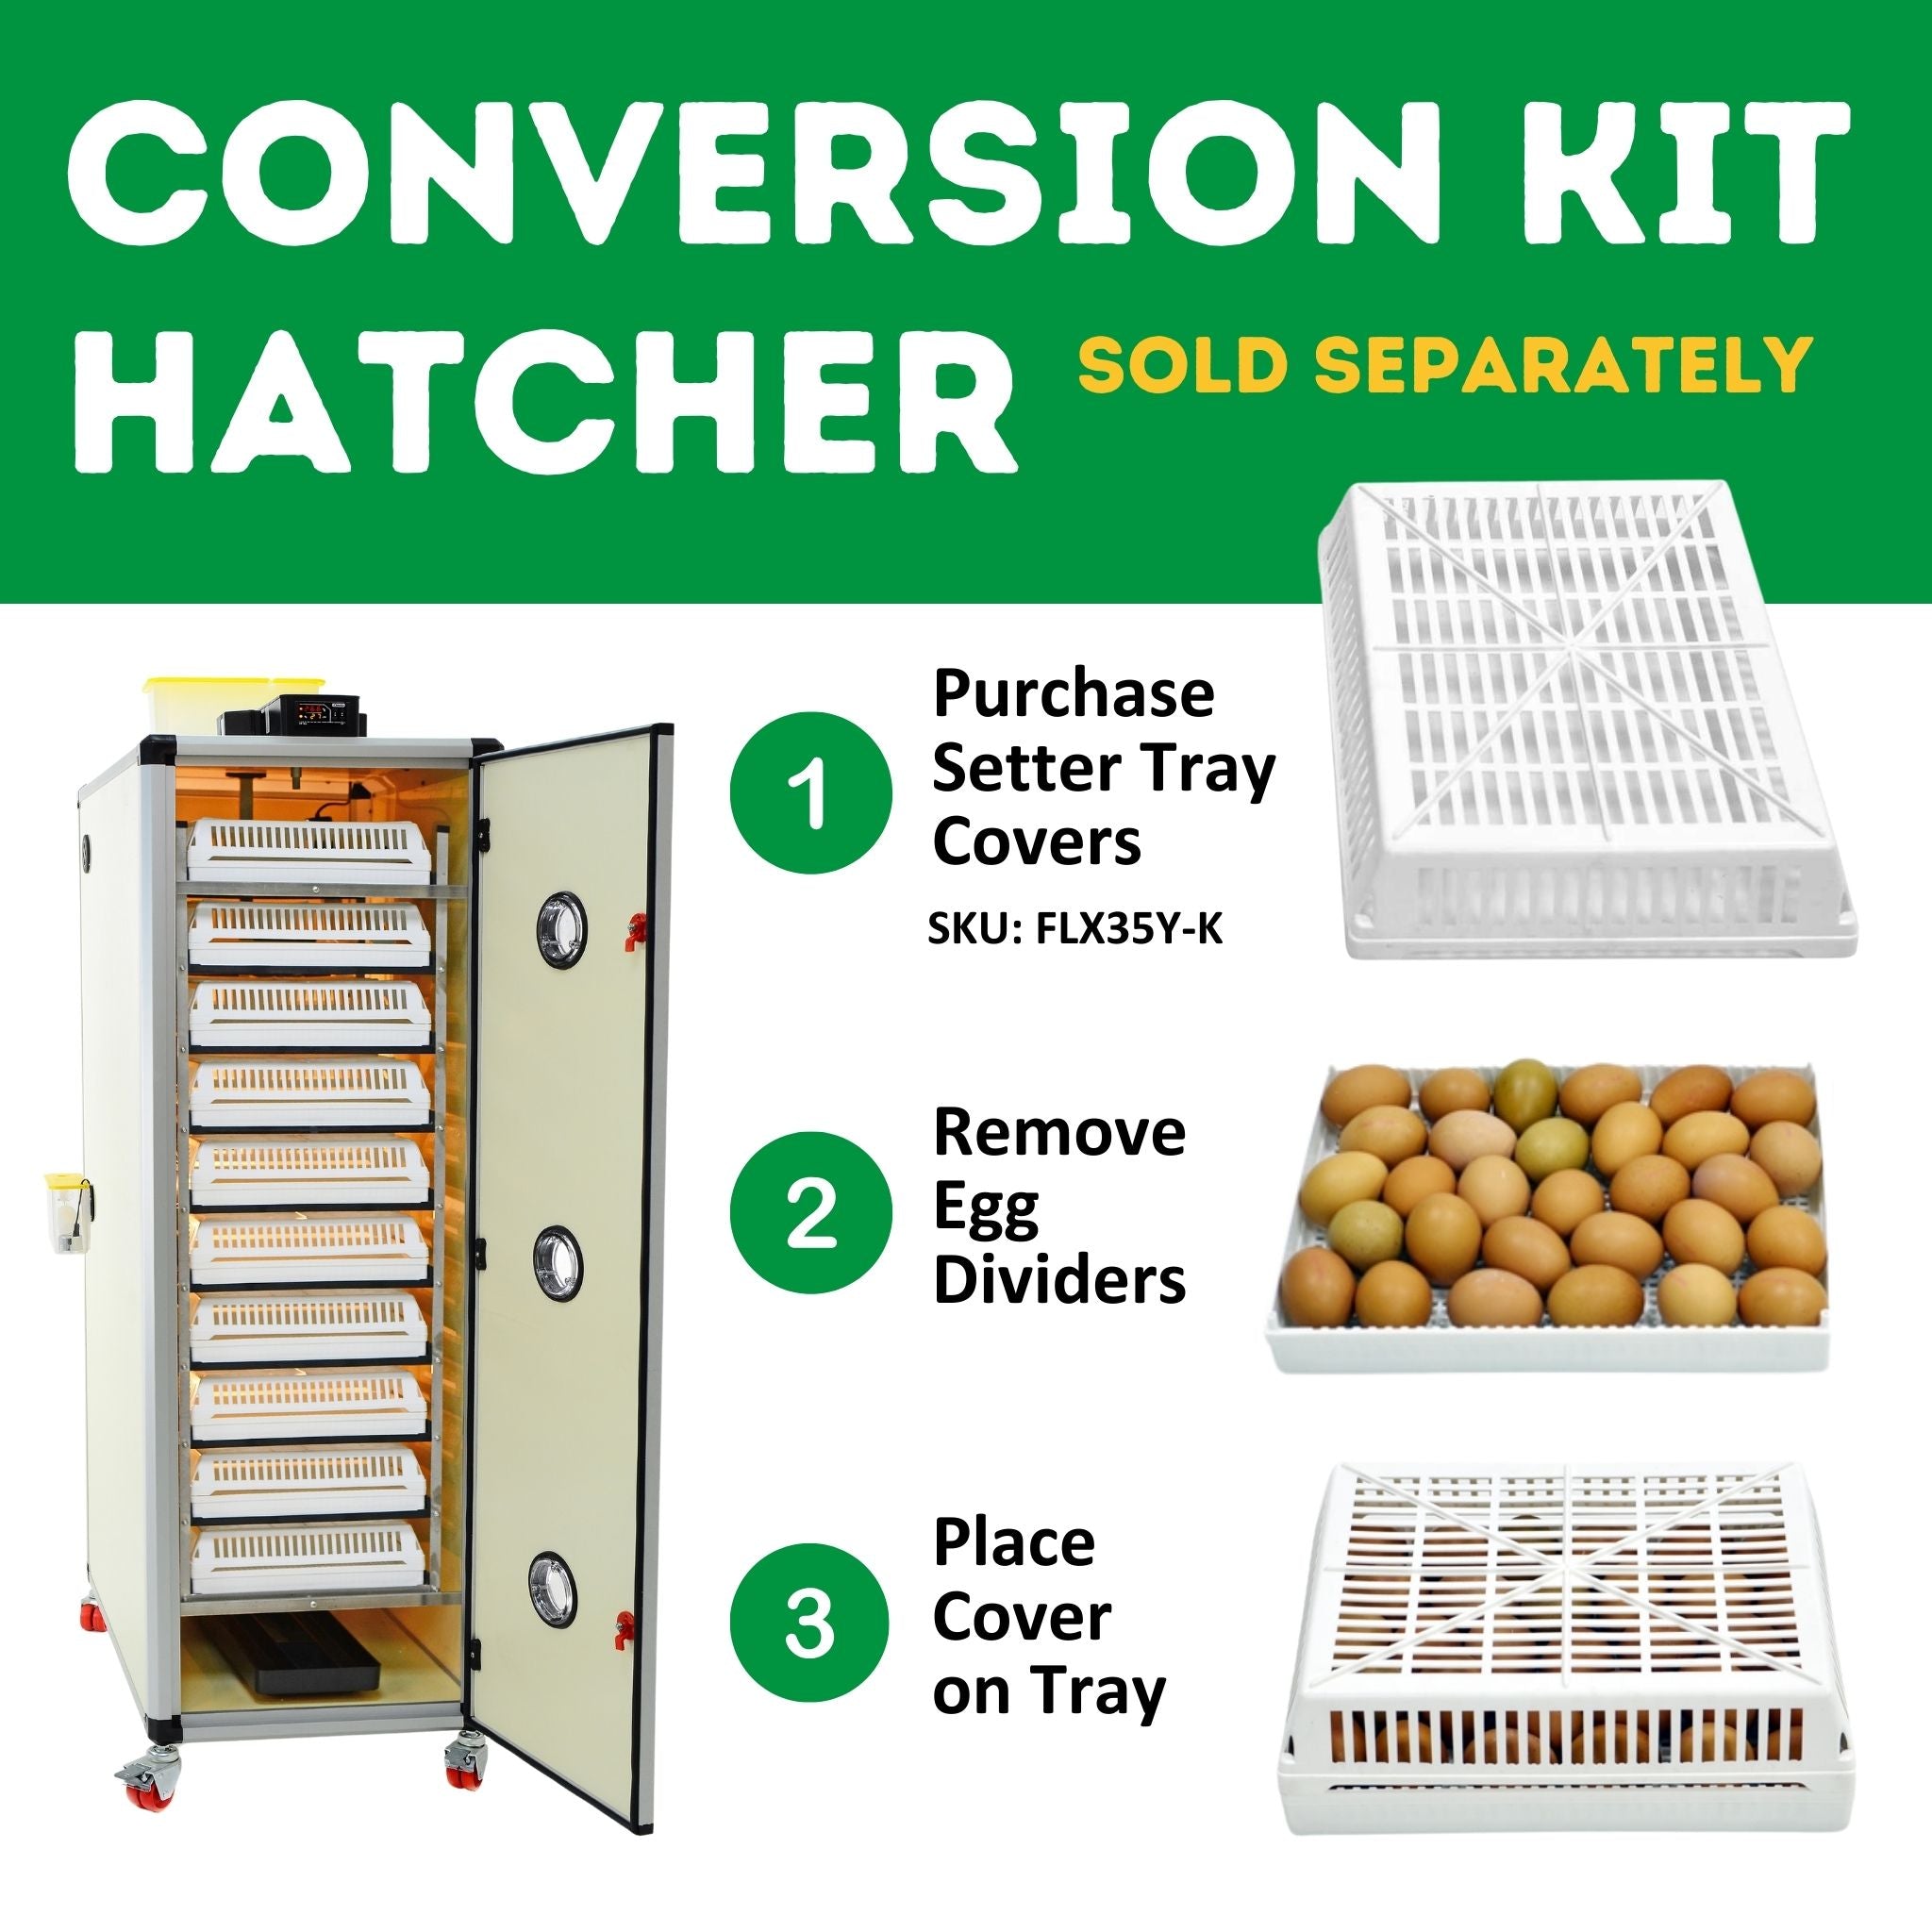 Hatching Time Cimuka. Infographic shows conversion kit hatcher (sold seperately) steps.